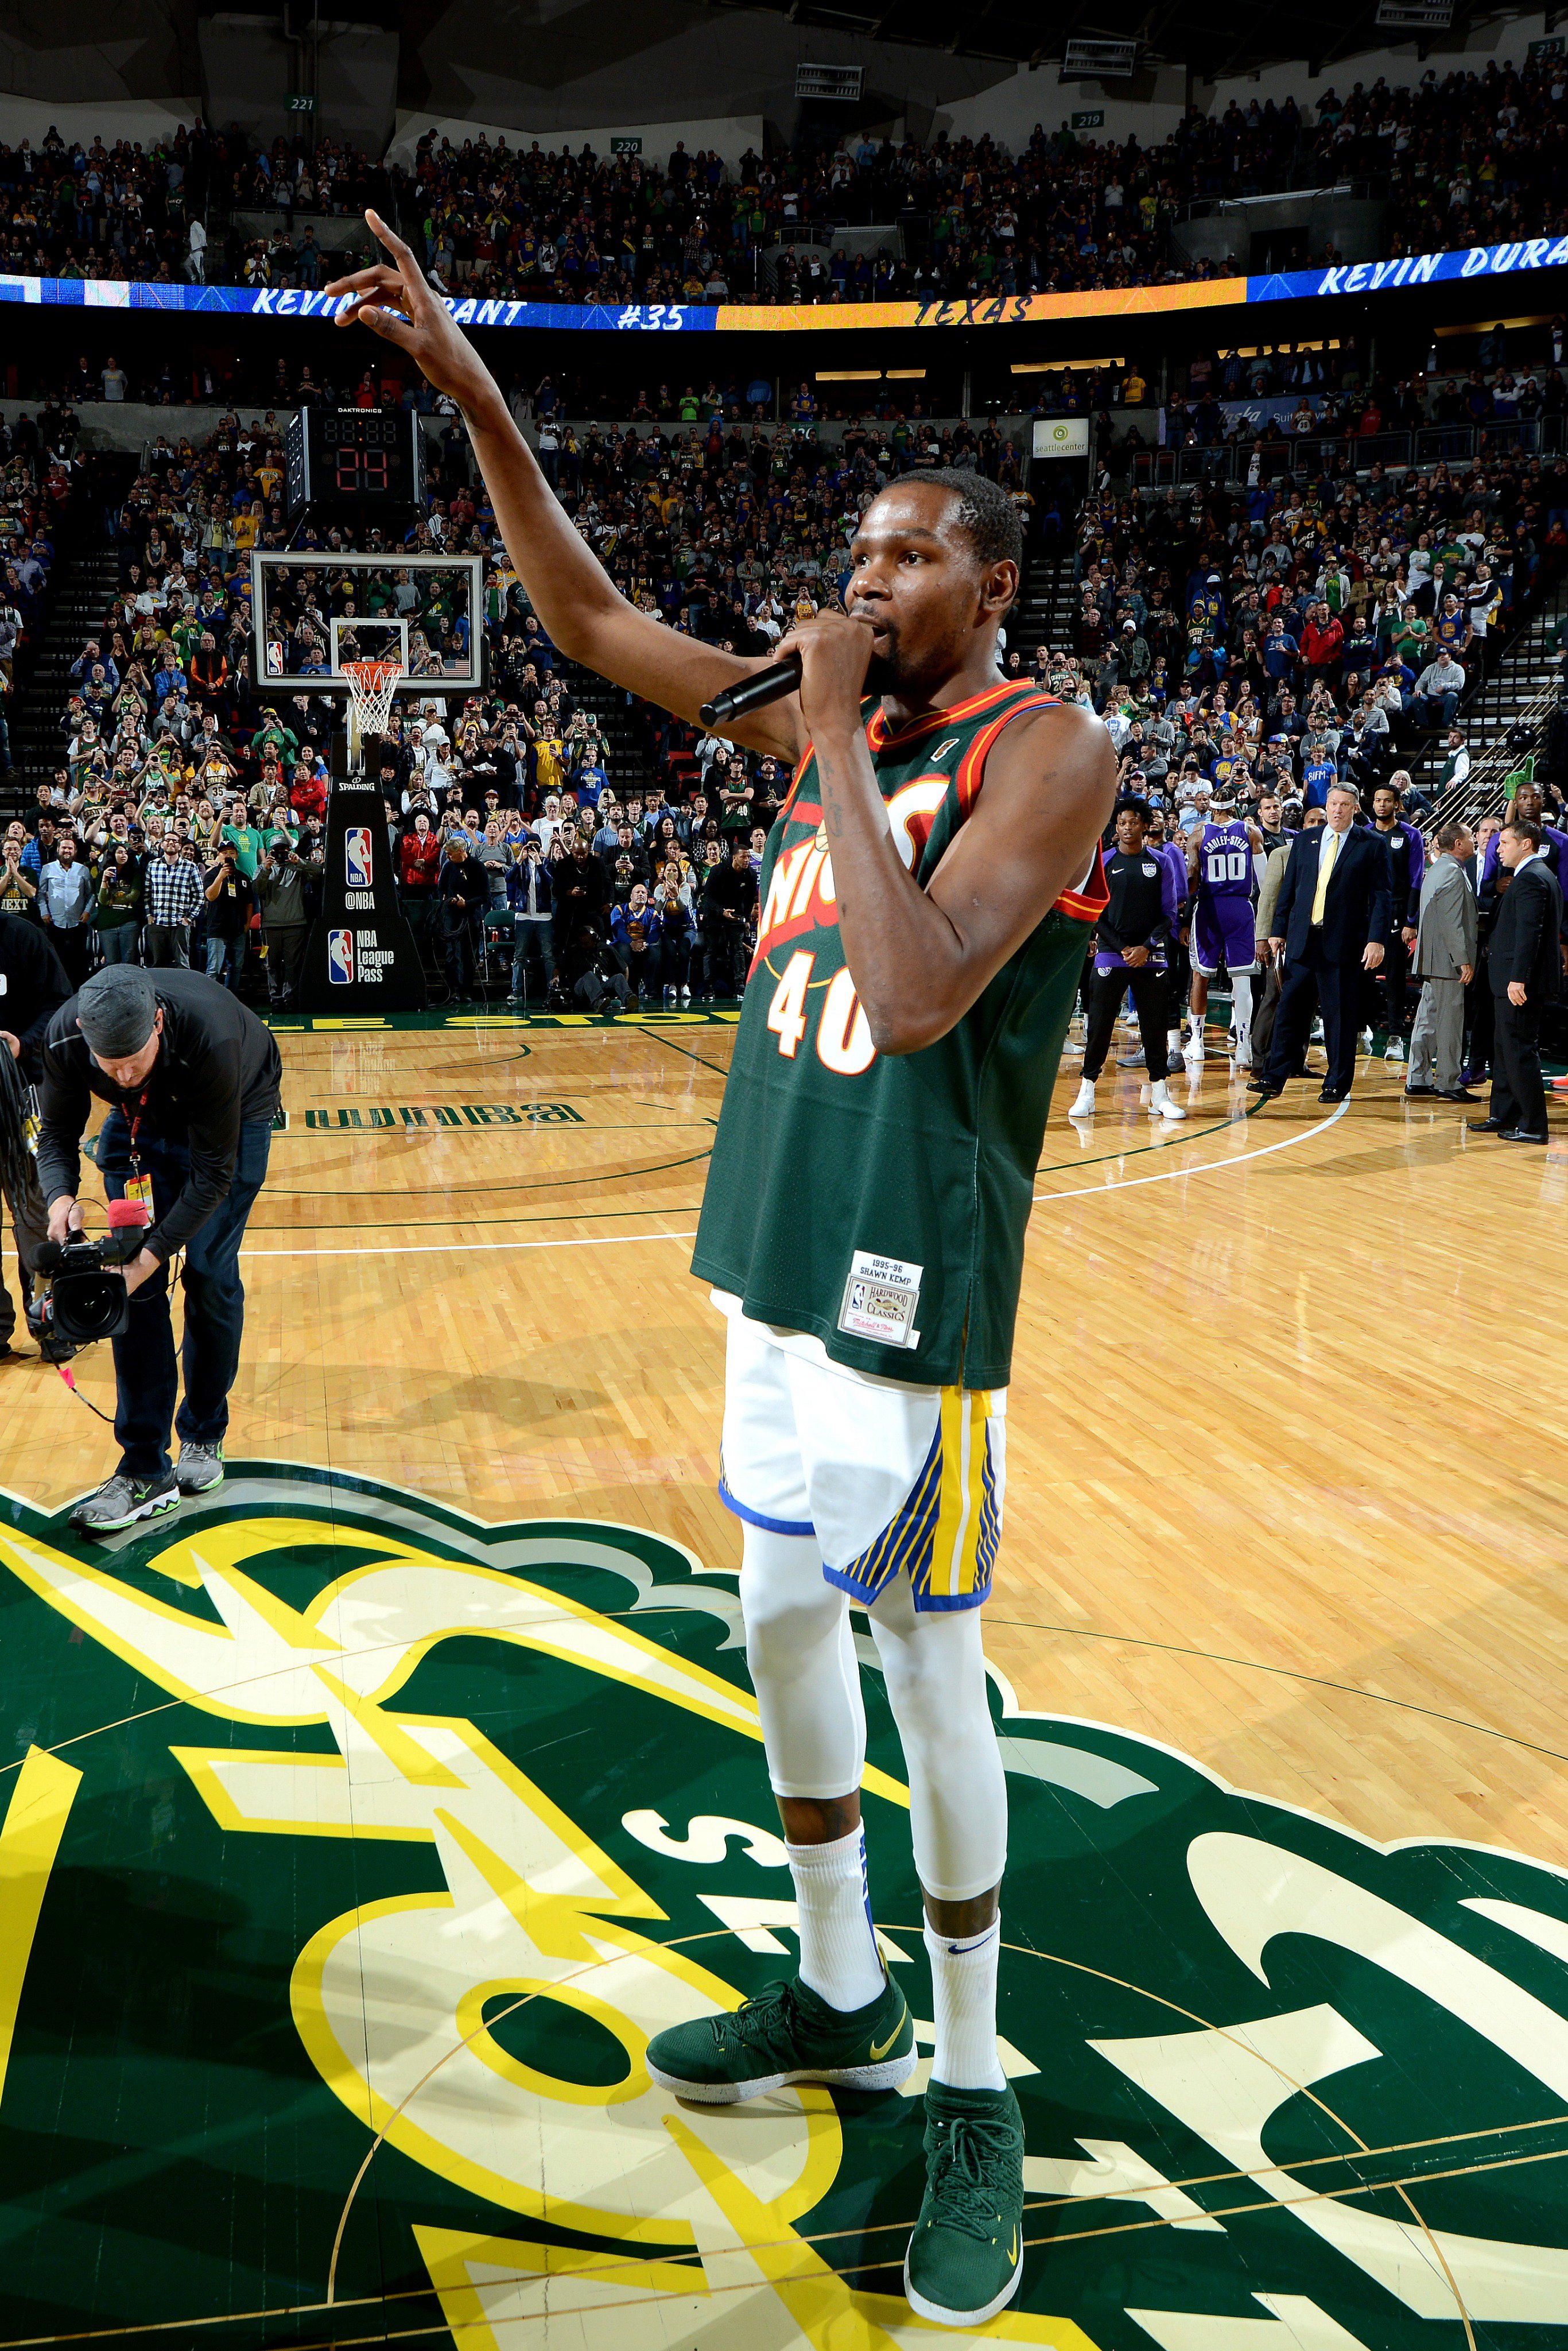 Warriors vs. Kings in Seattle: Former SuperSonic Kevin Durant takes court  in vintage Shawn Kemp jersey 